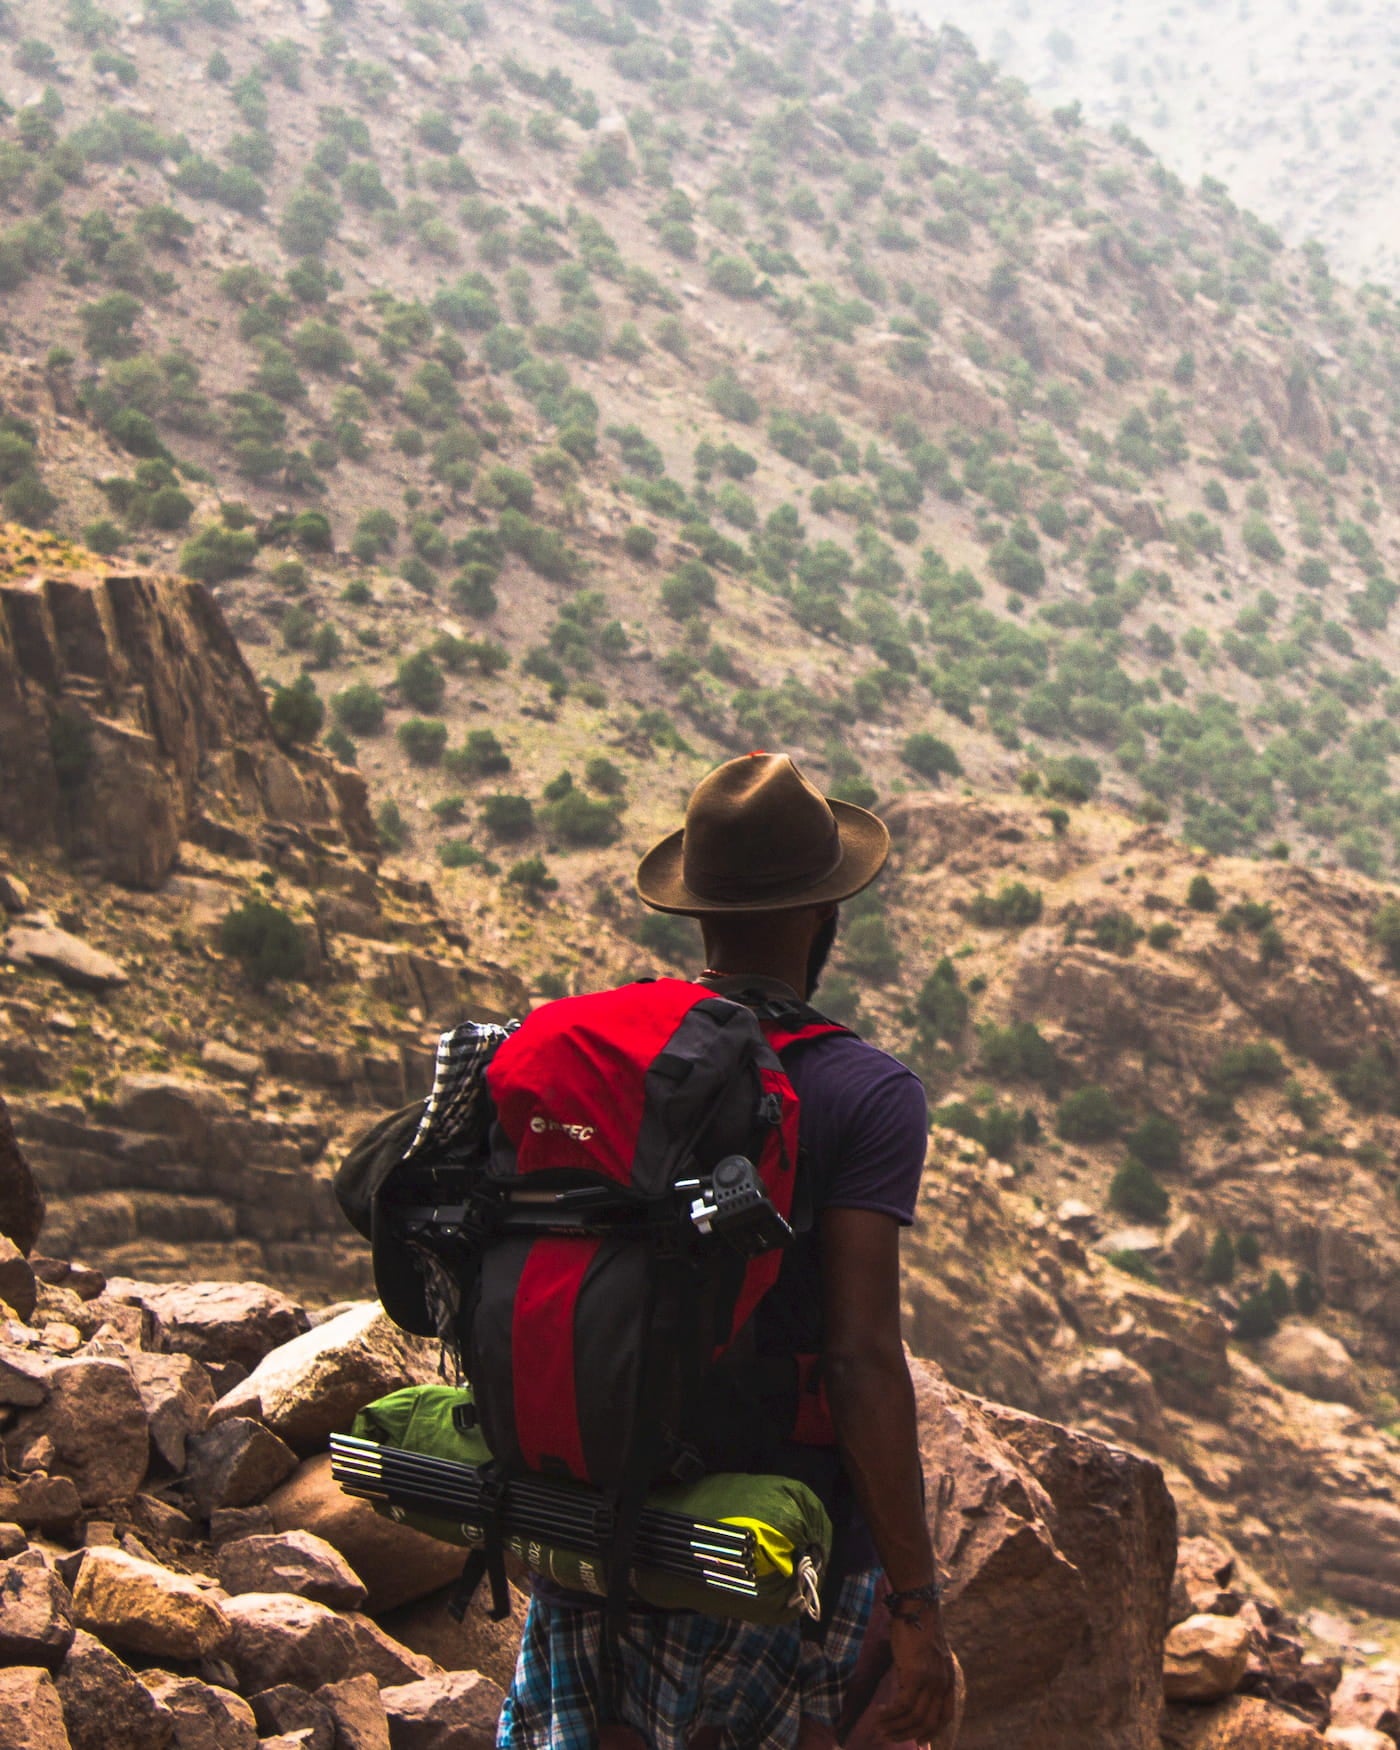 Hiker carrying backpack with camping gear in a desert landscape.